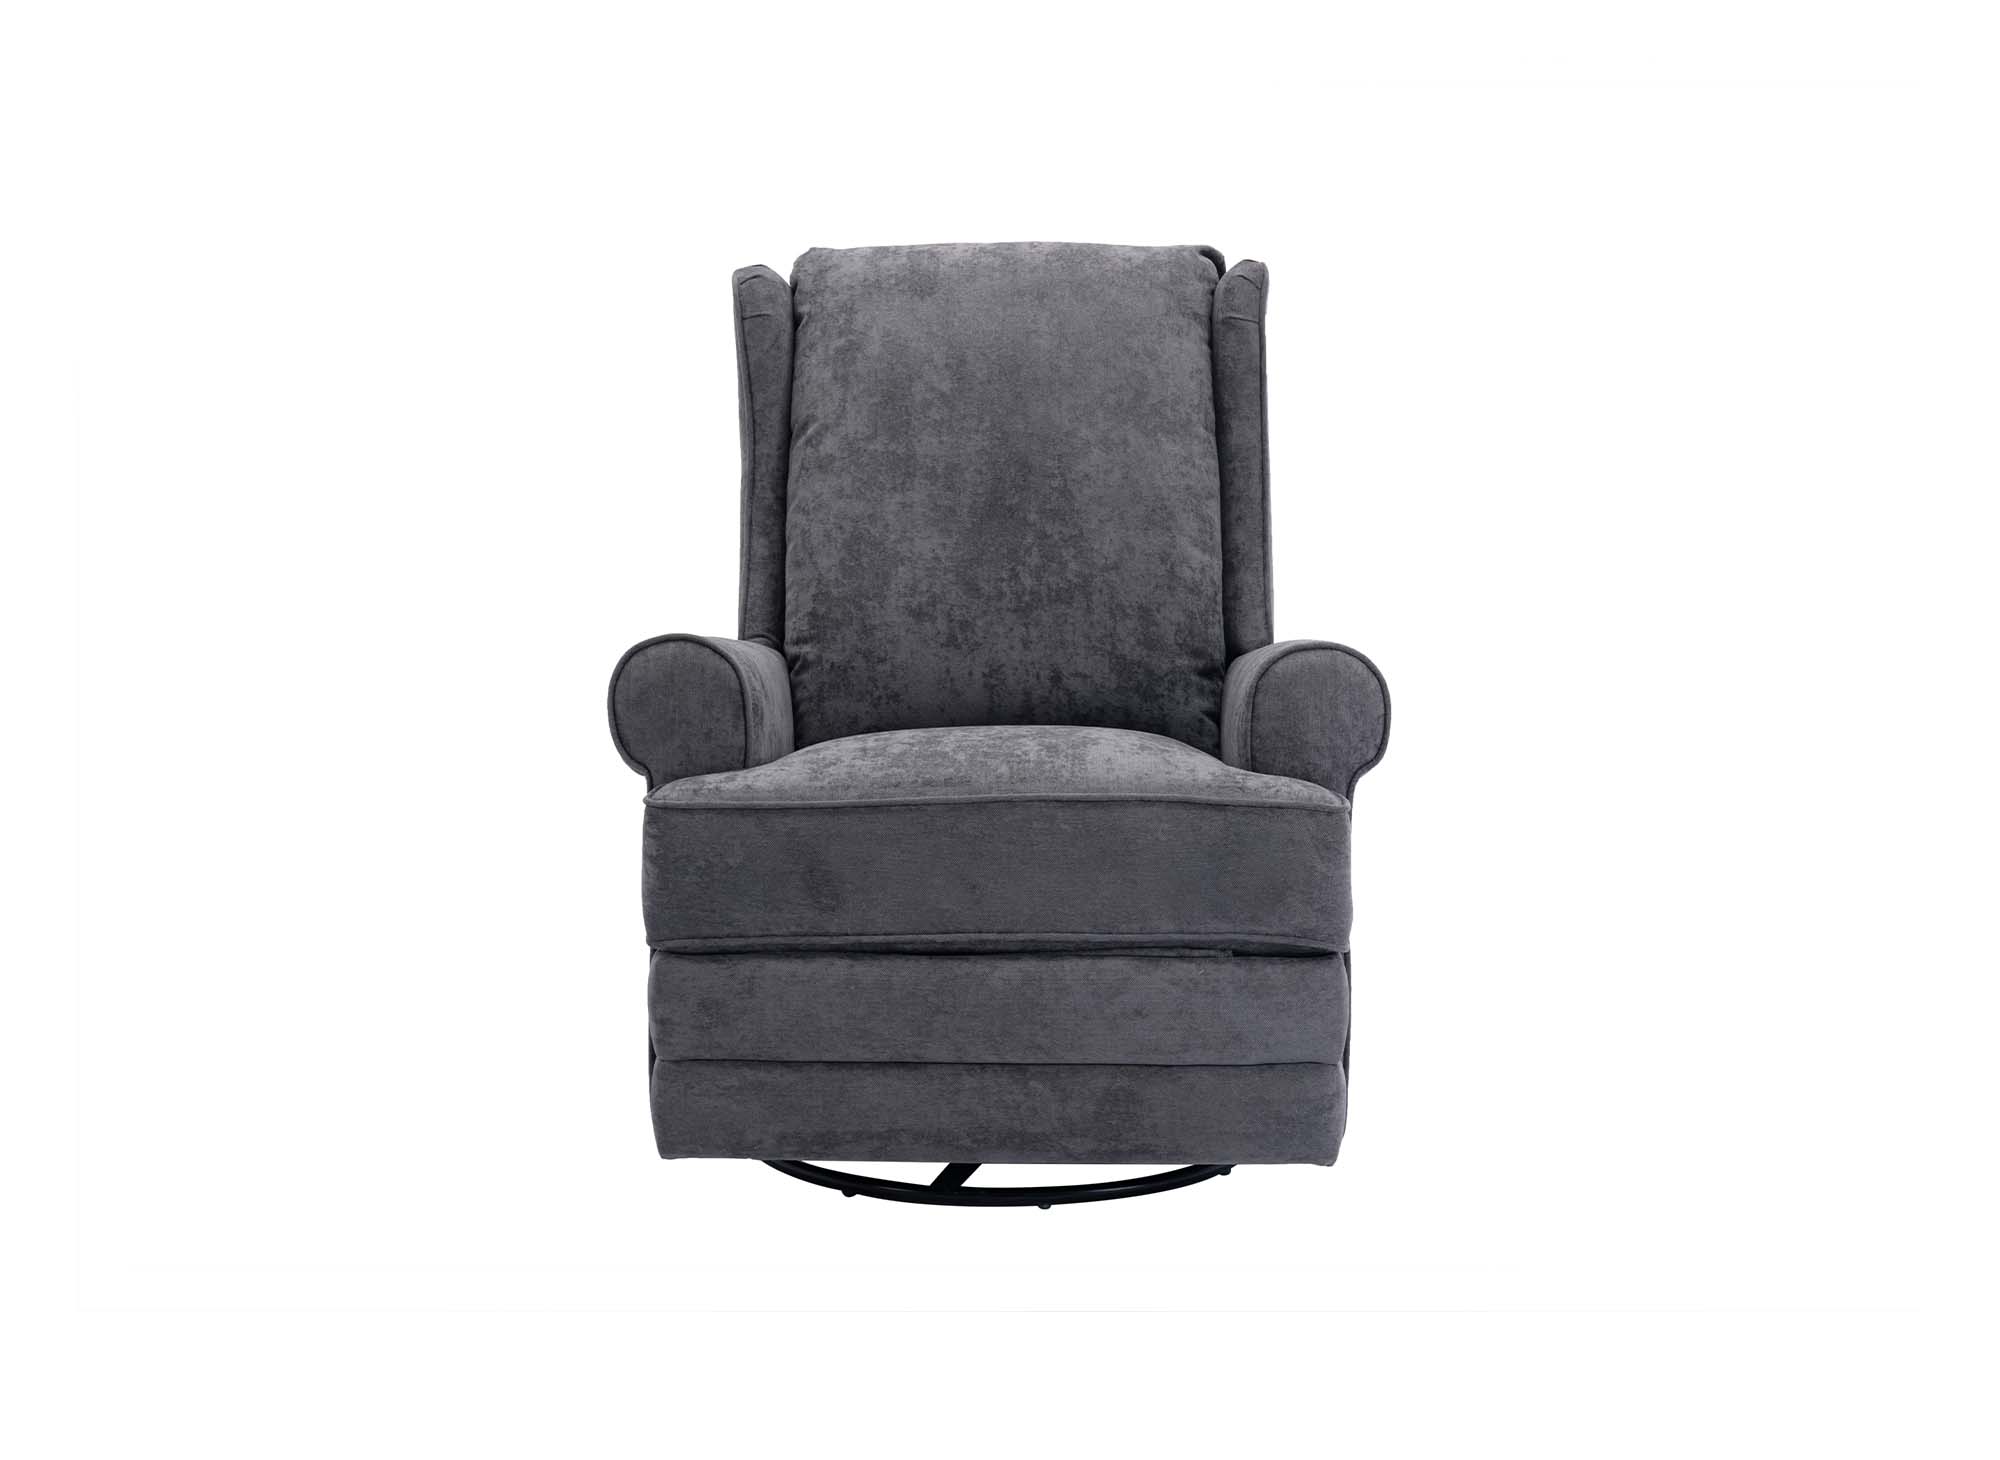 RelaxSeat™ - Couvre siège chauffant et relaxant – Baryolle